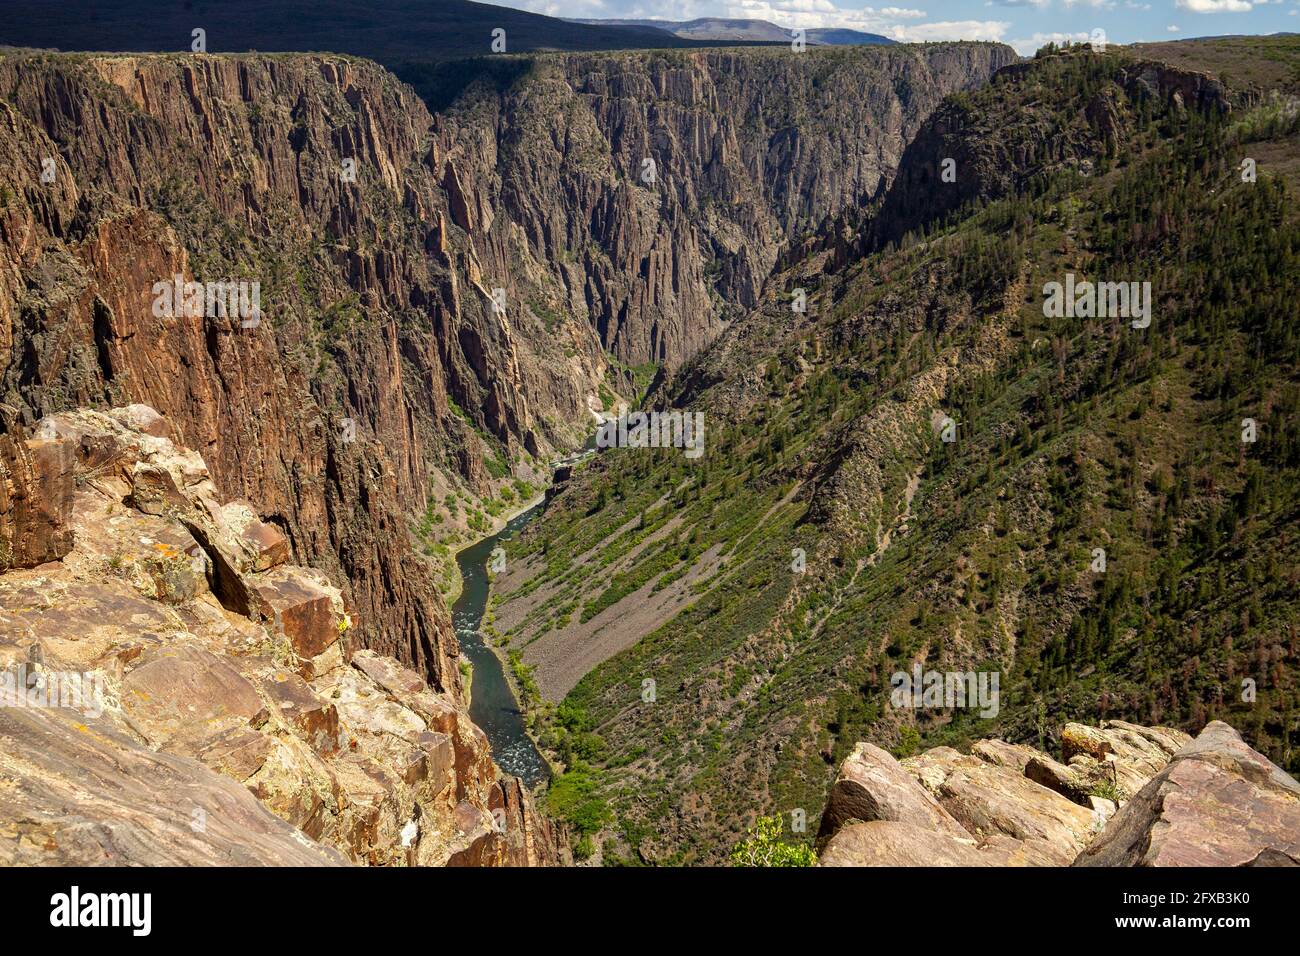 Black Canyon of the Gunnison National Park is an American national park located in western Colorado and managed by the National Park Service. Stock Photo